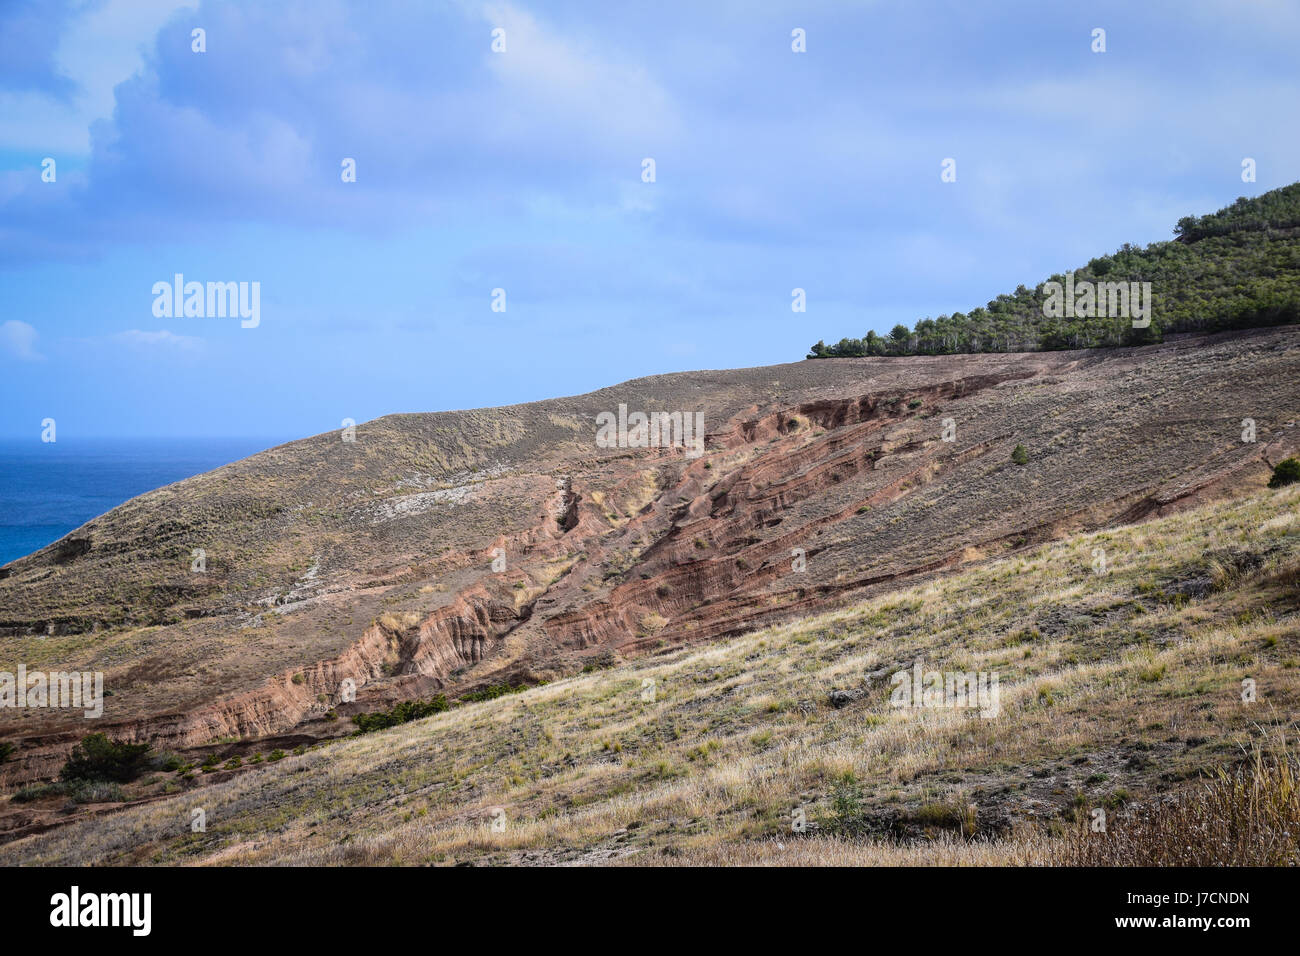 Landscape of Porto Santo with eroded landscape from heavy rainfall Stock Photo